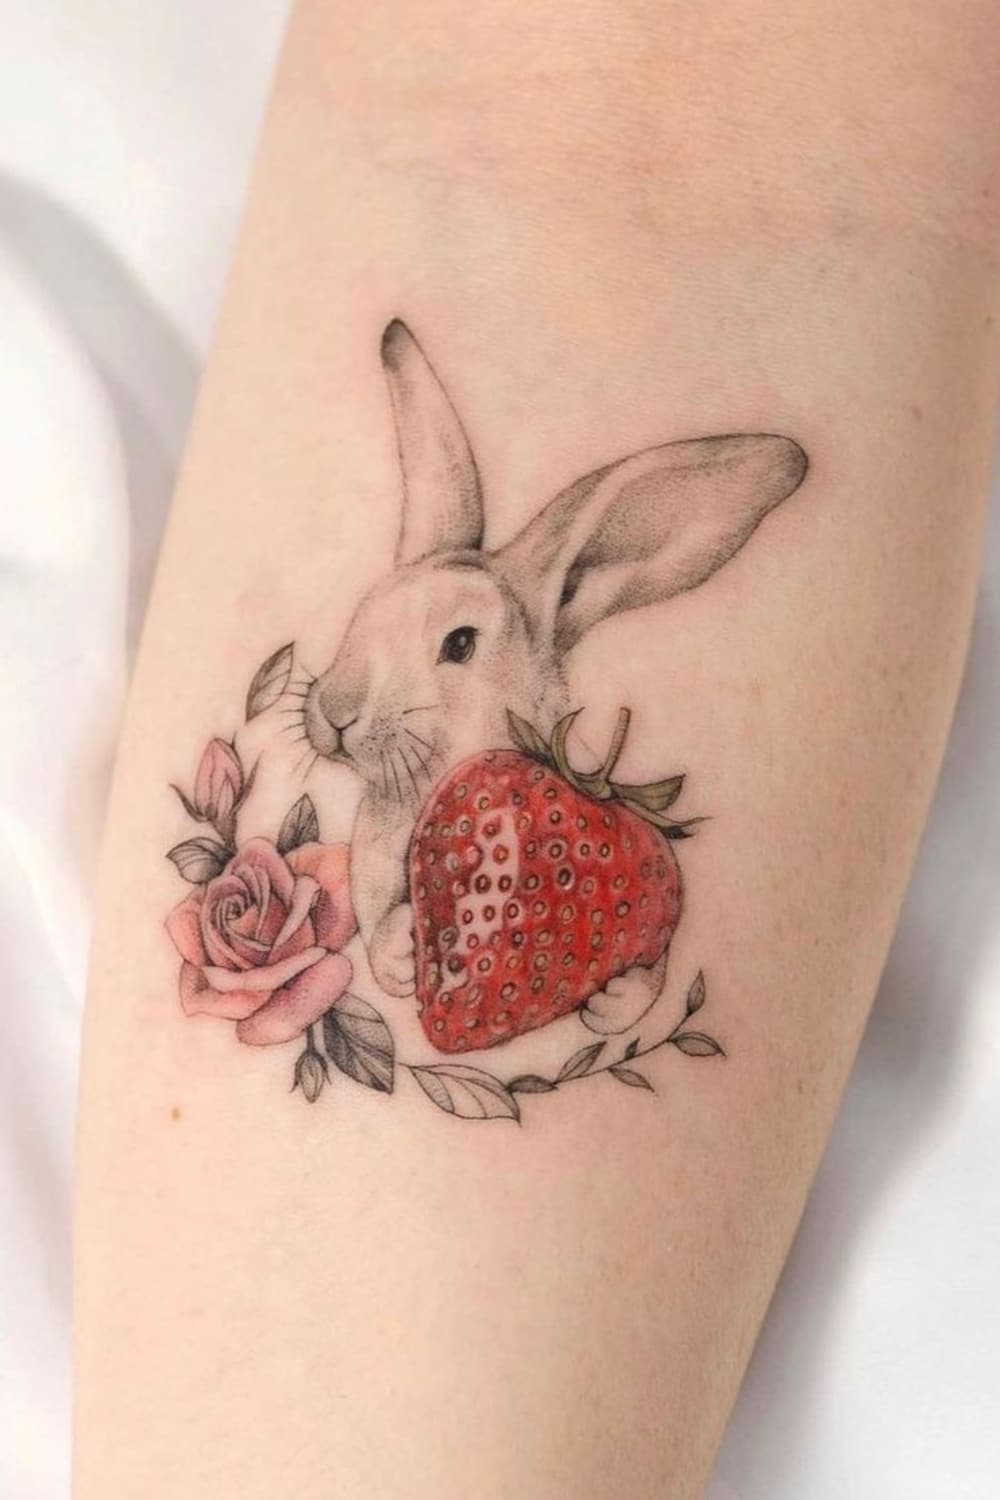 Strawberry Tattoo With Rabbit and Flower